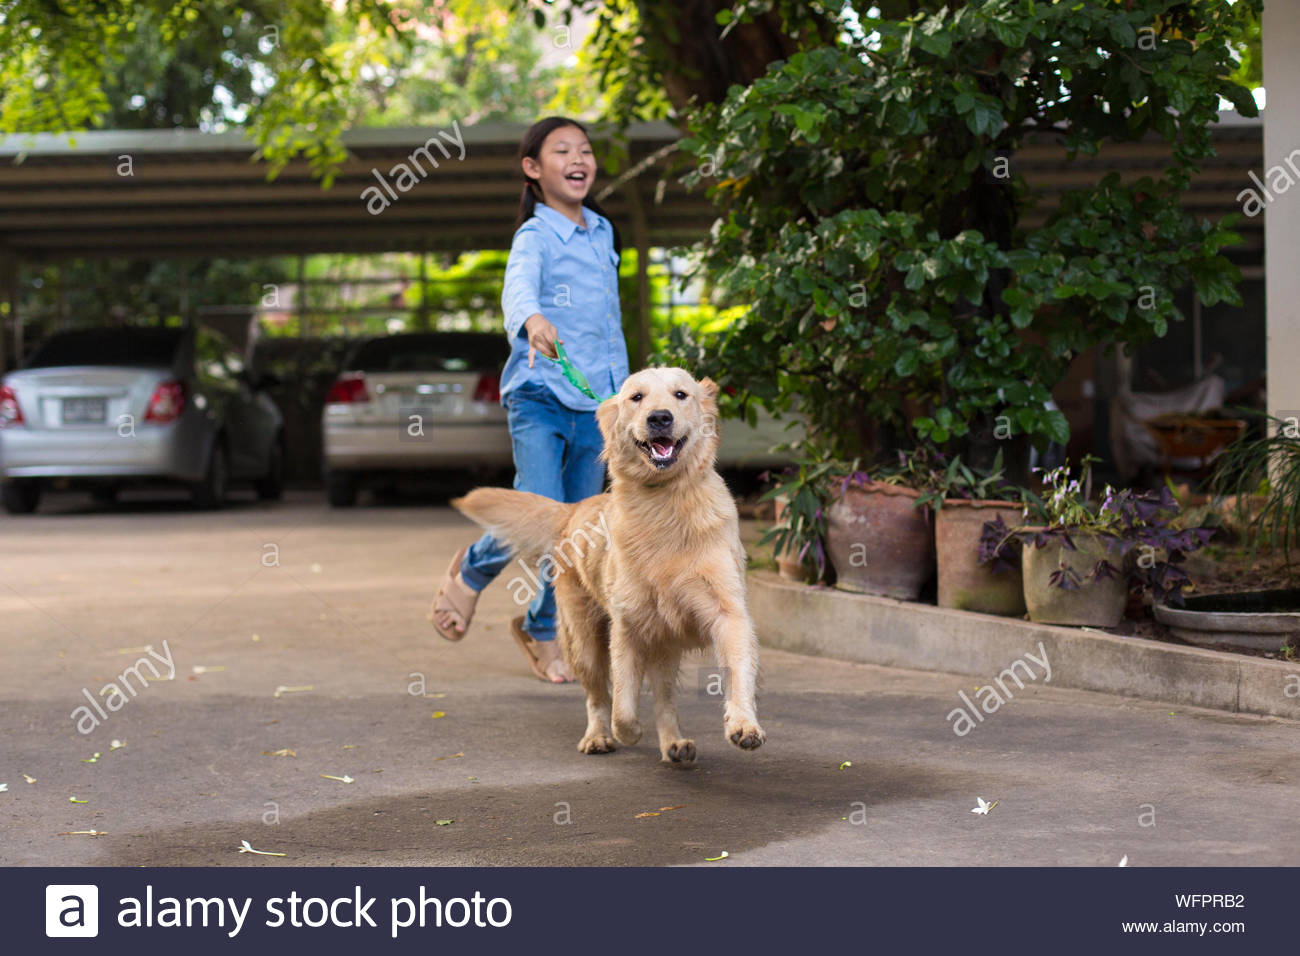 Portrait Of A Gril Running With Dog Stock Photo - Alamy